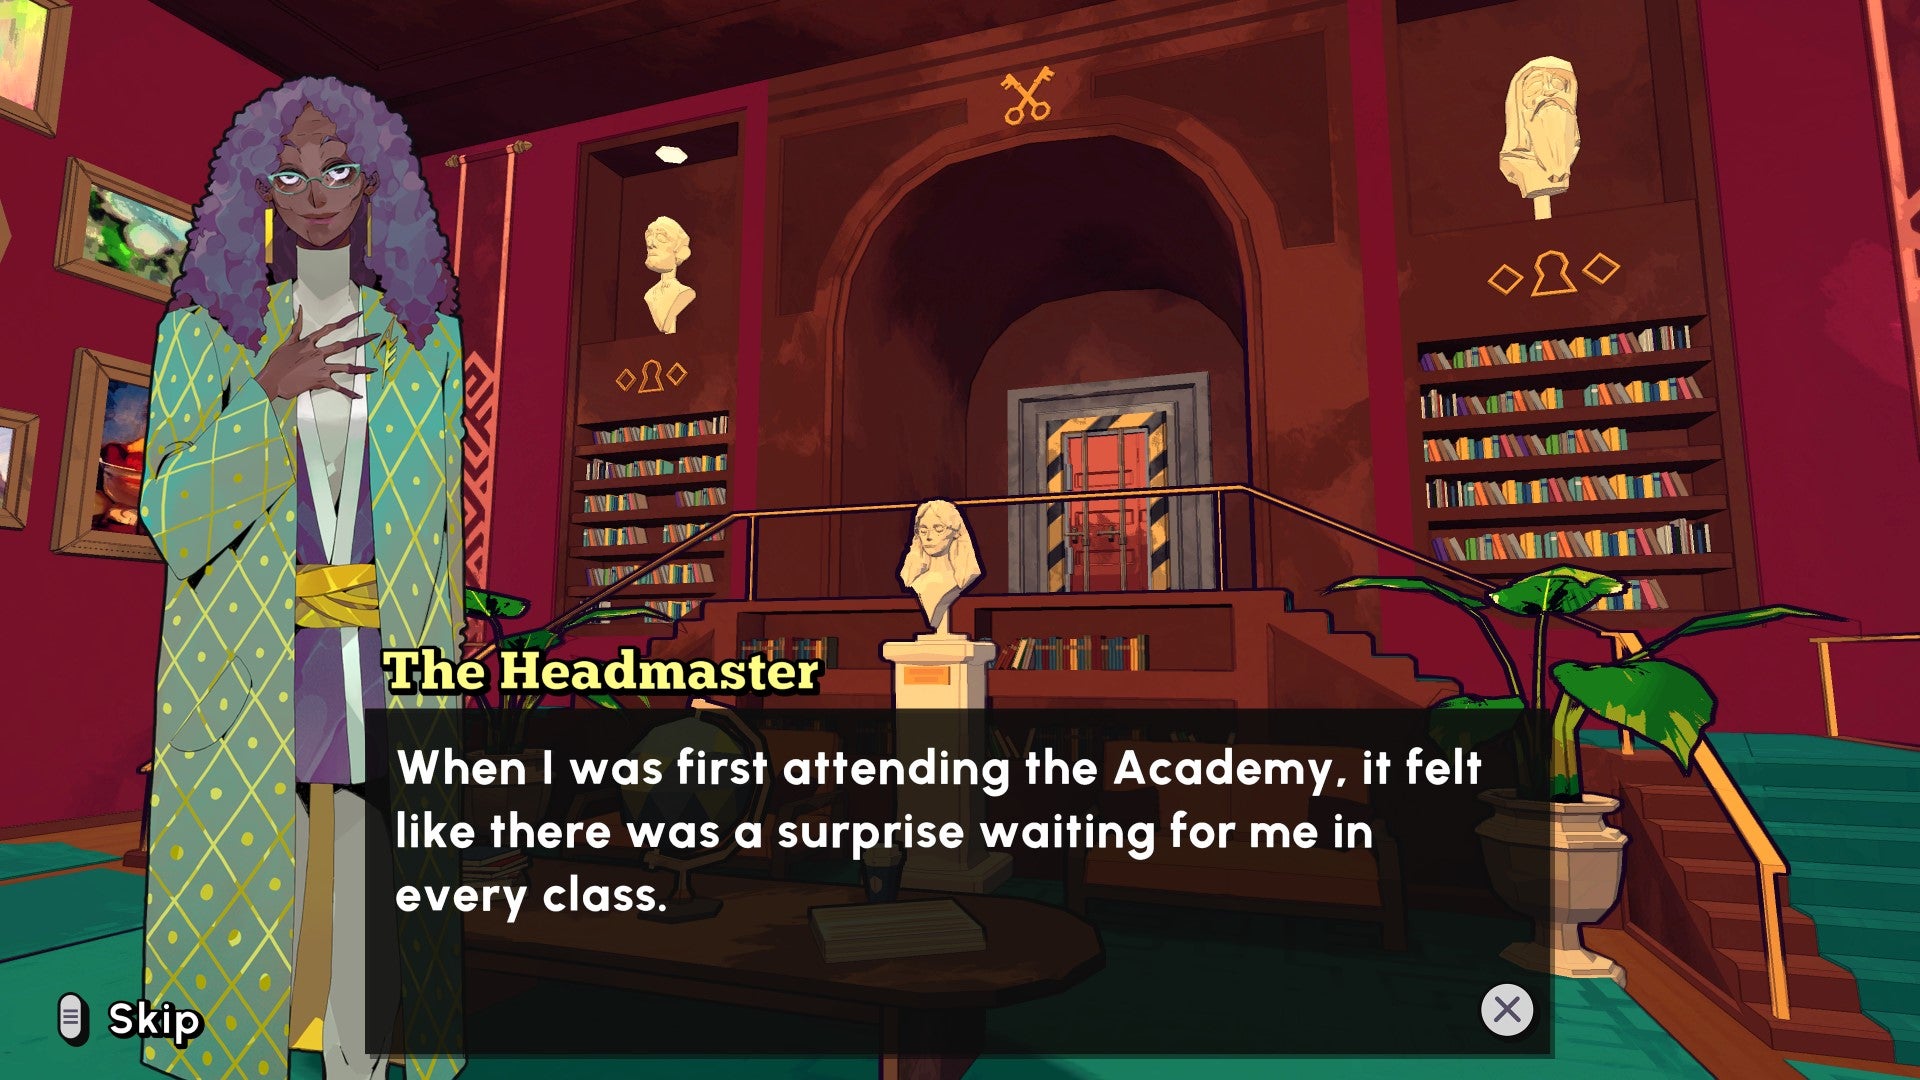 Chatting to the headmaster in Escape Academy.